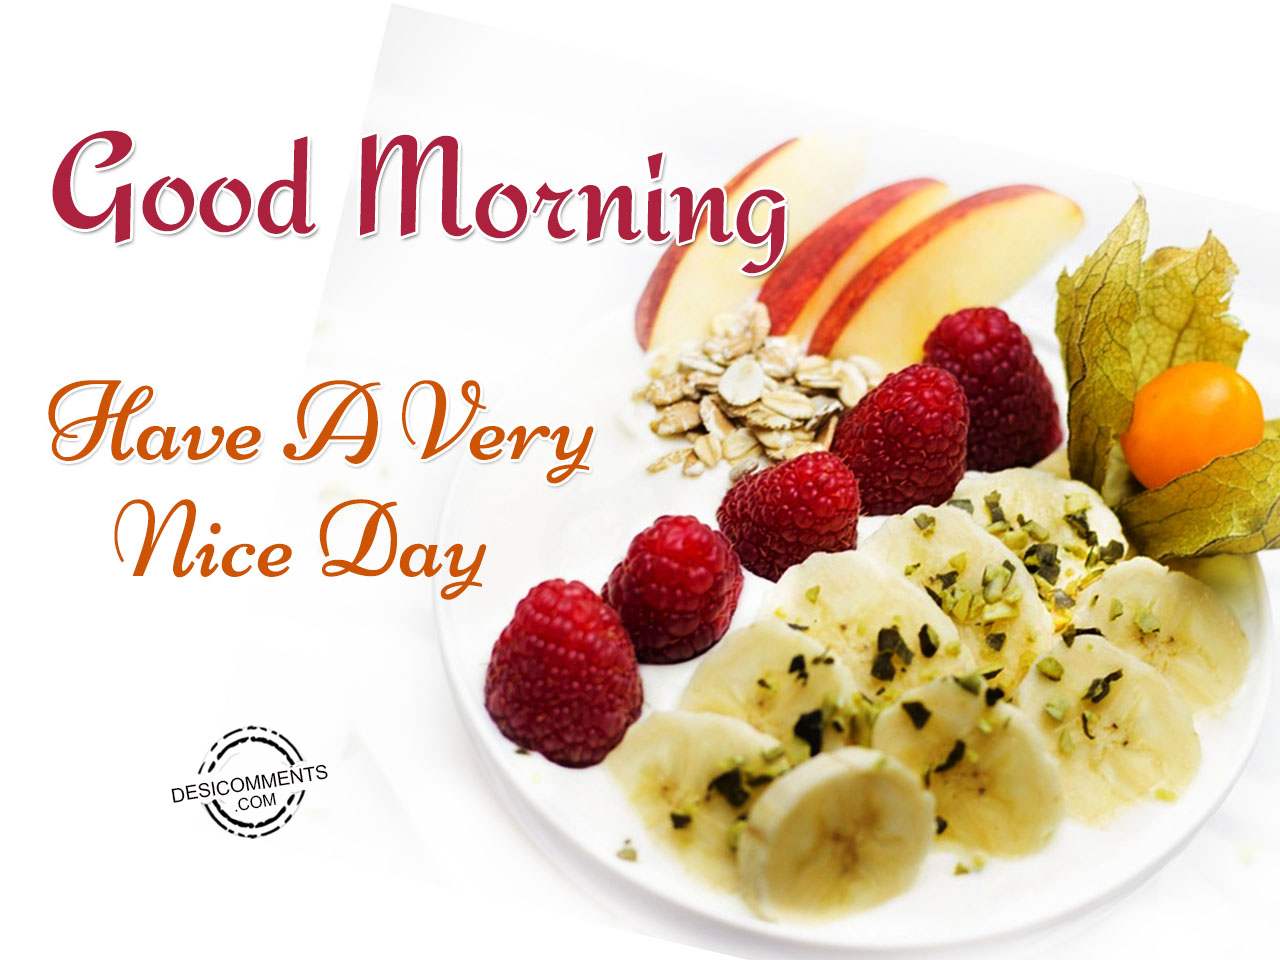 Good Morning – Have A Very Nice Day - DesiComments.com